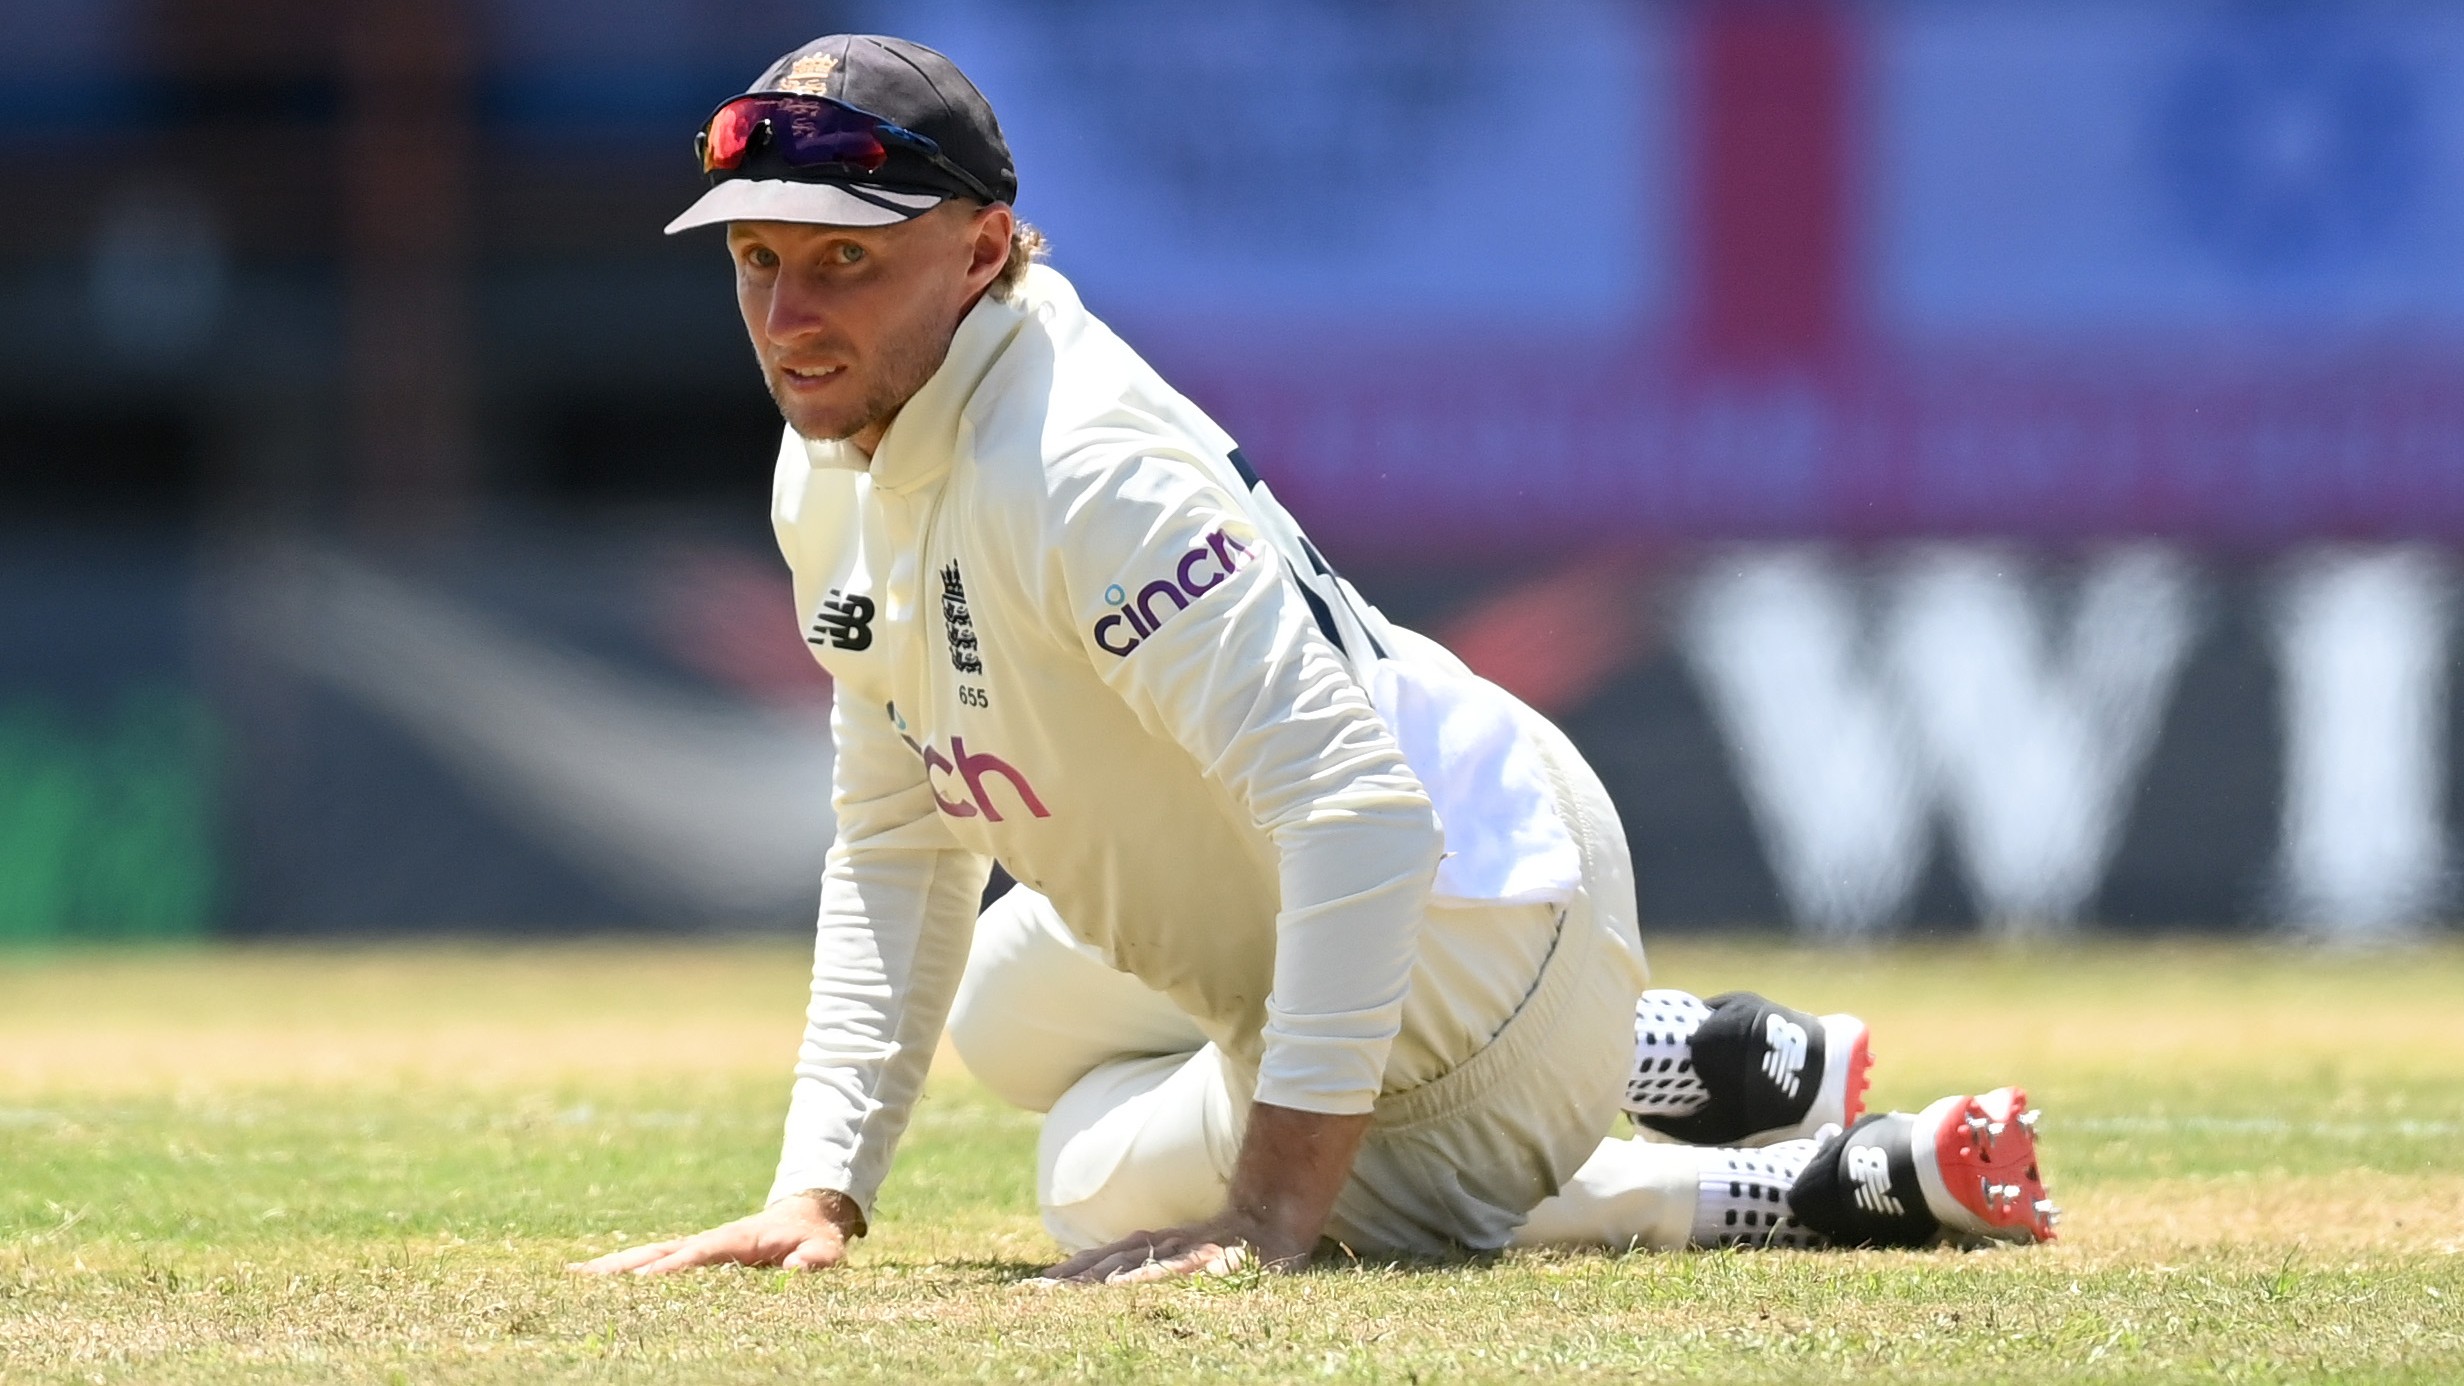 Joe Root resigns as England Test captain after tumultuous tours of Australia and the West Indies, cricket news